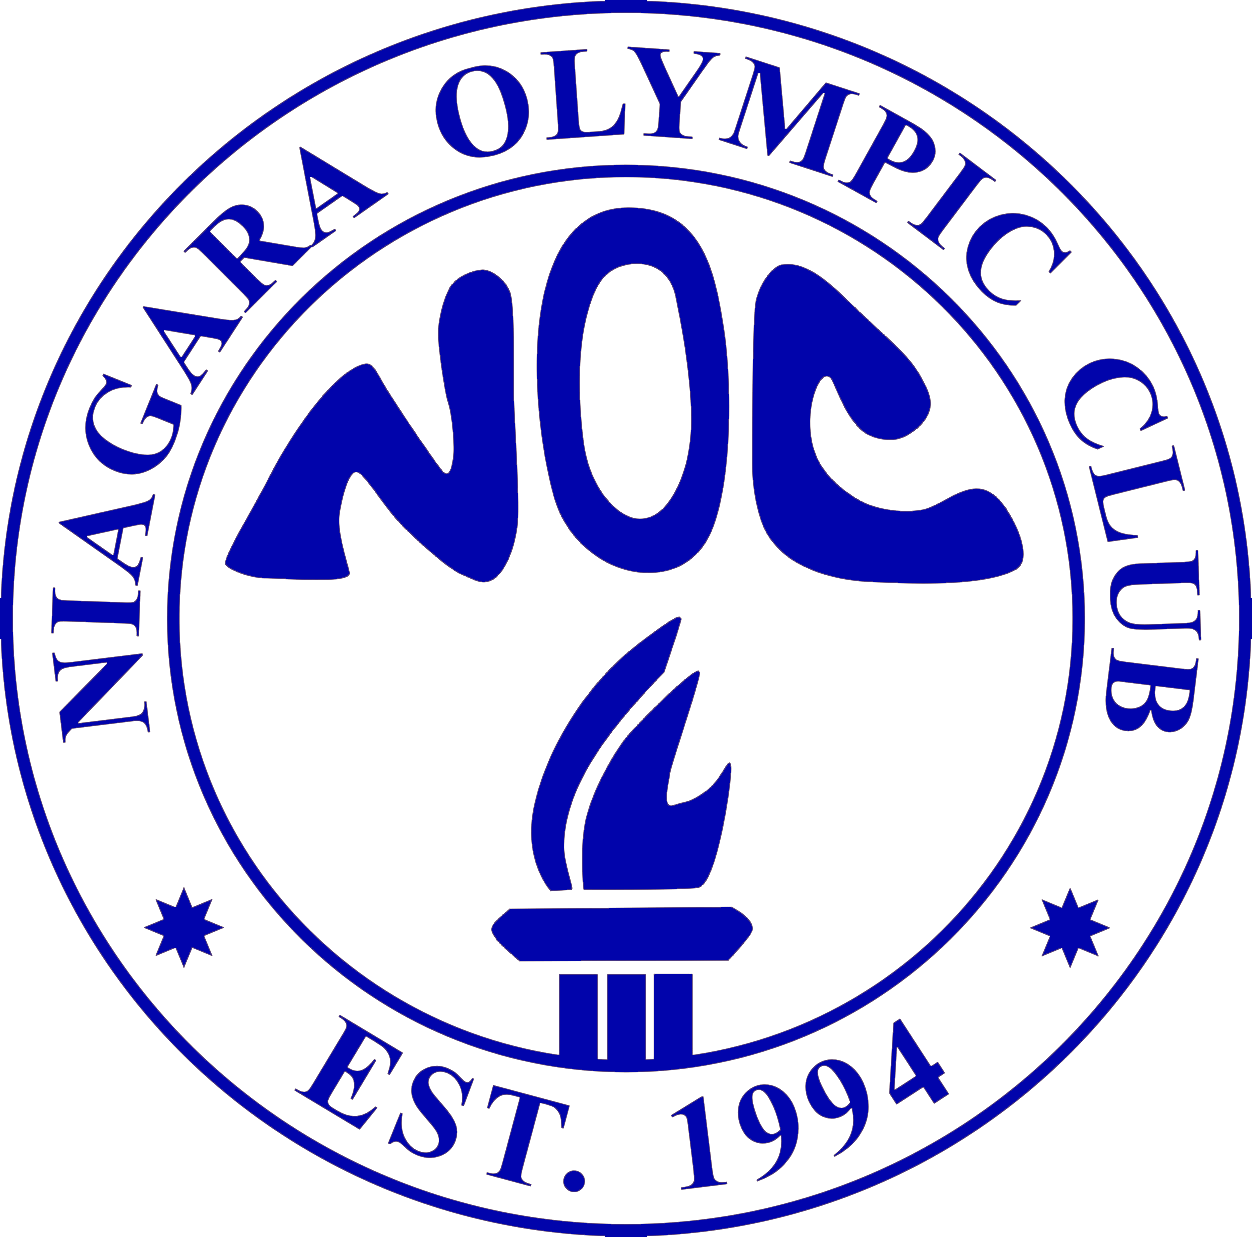 NOC Training Permits Track and Field Complex